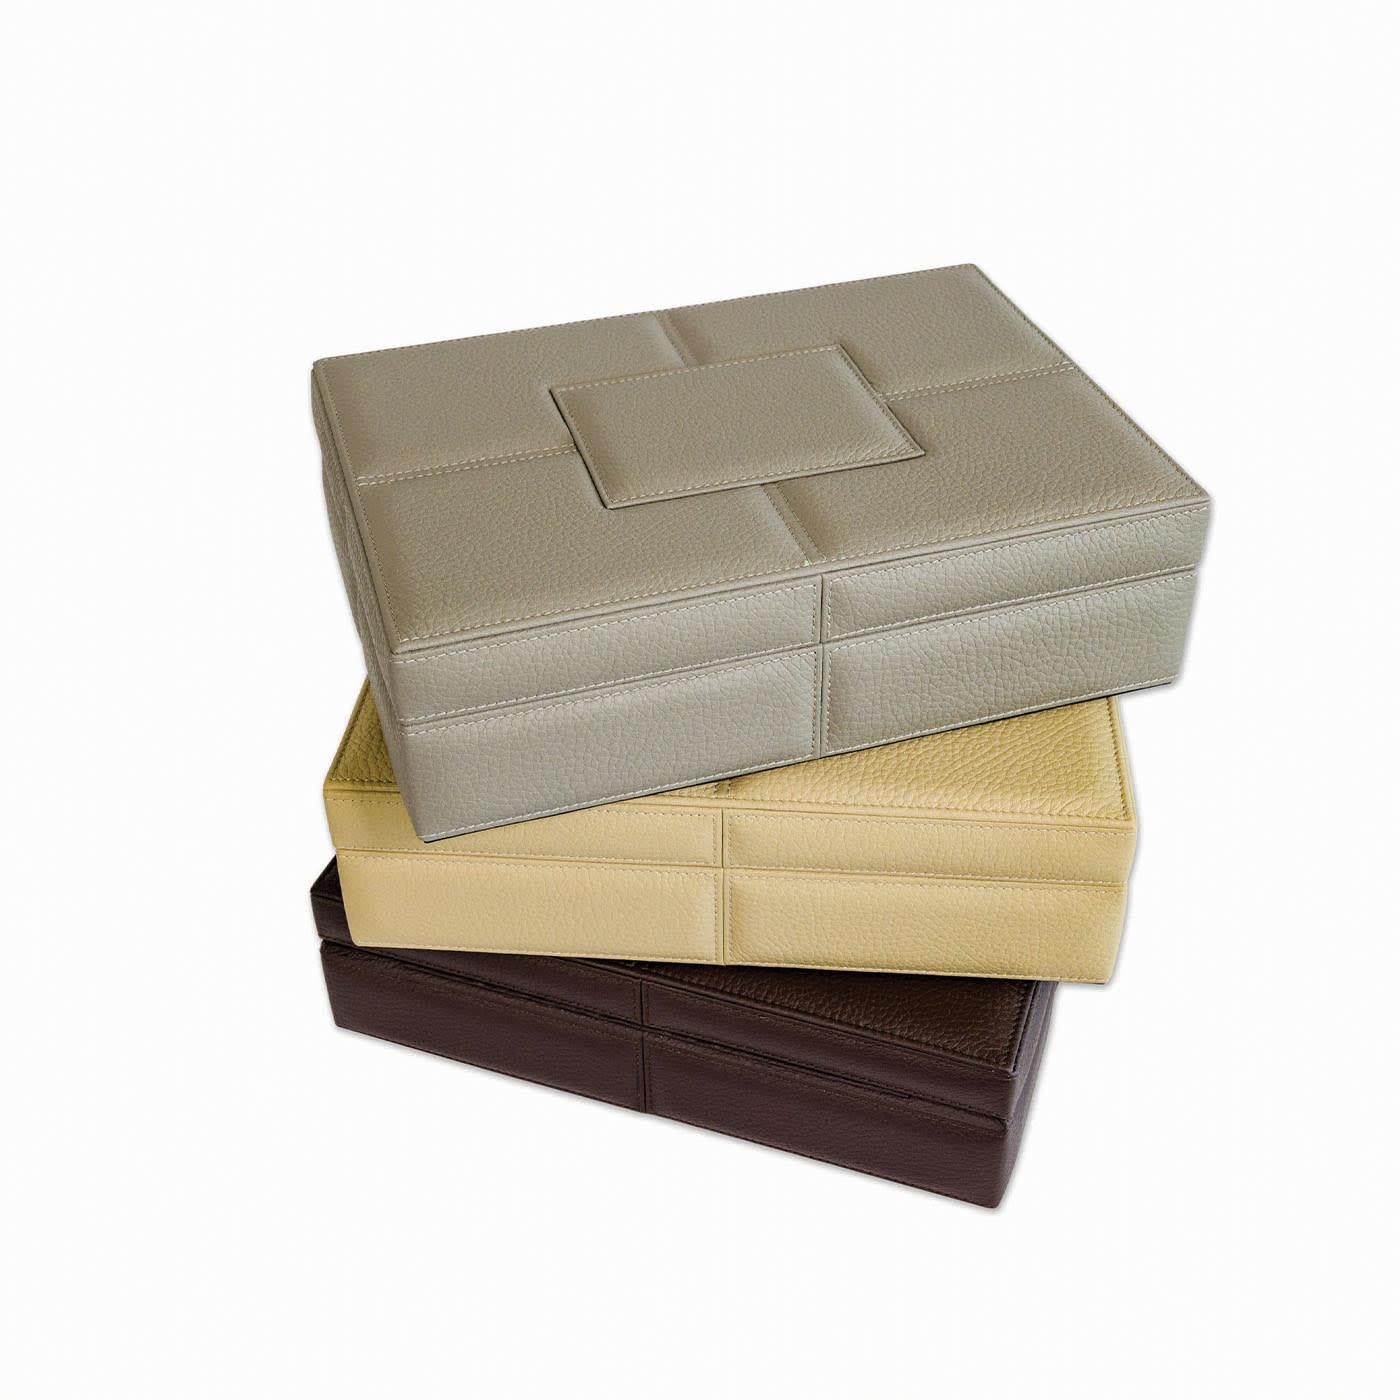 Wooden handmade box, with plateau, dressed in fine and soft genuine leather and with decorative soft stitching and internal microfiber fabric. Available in 14 different colors. Please, ask the Concierge for further details.

